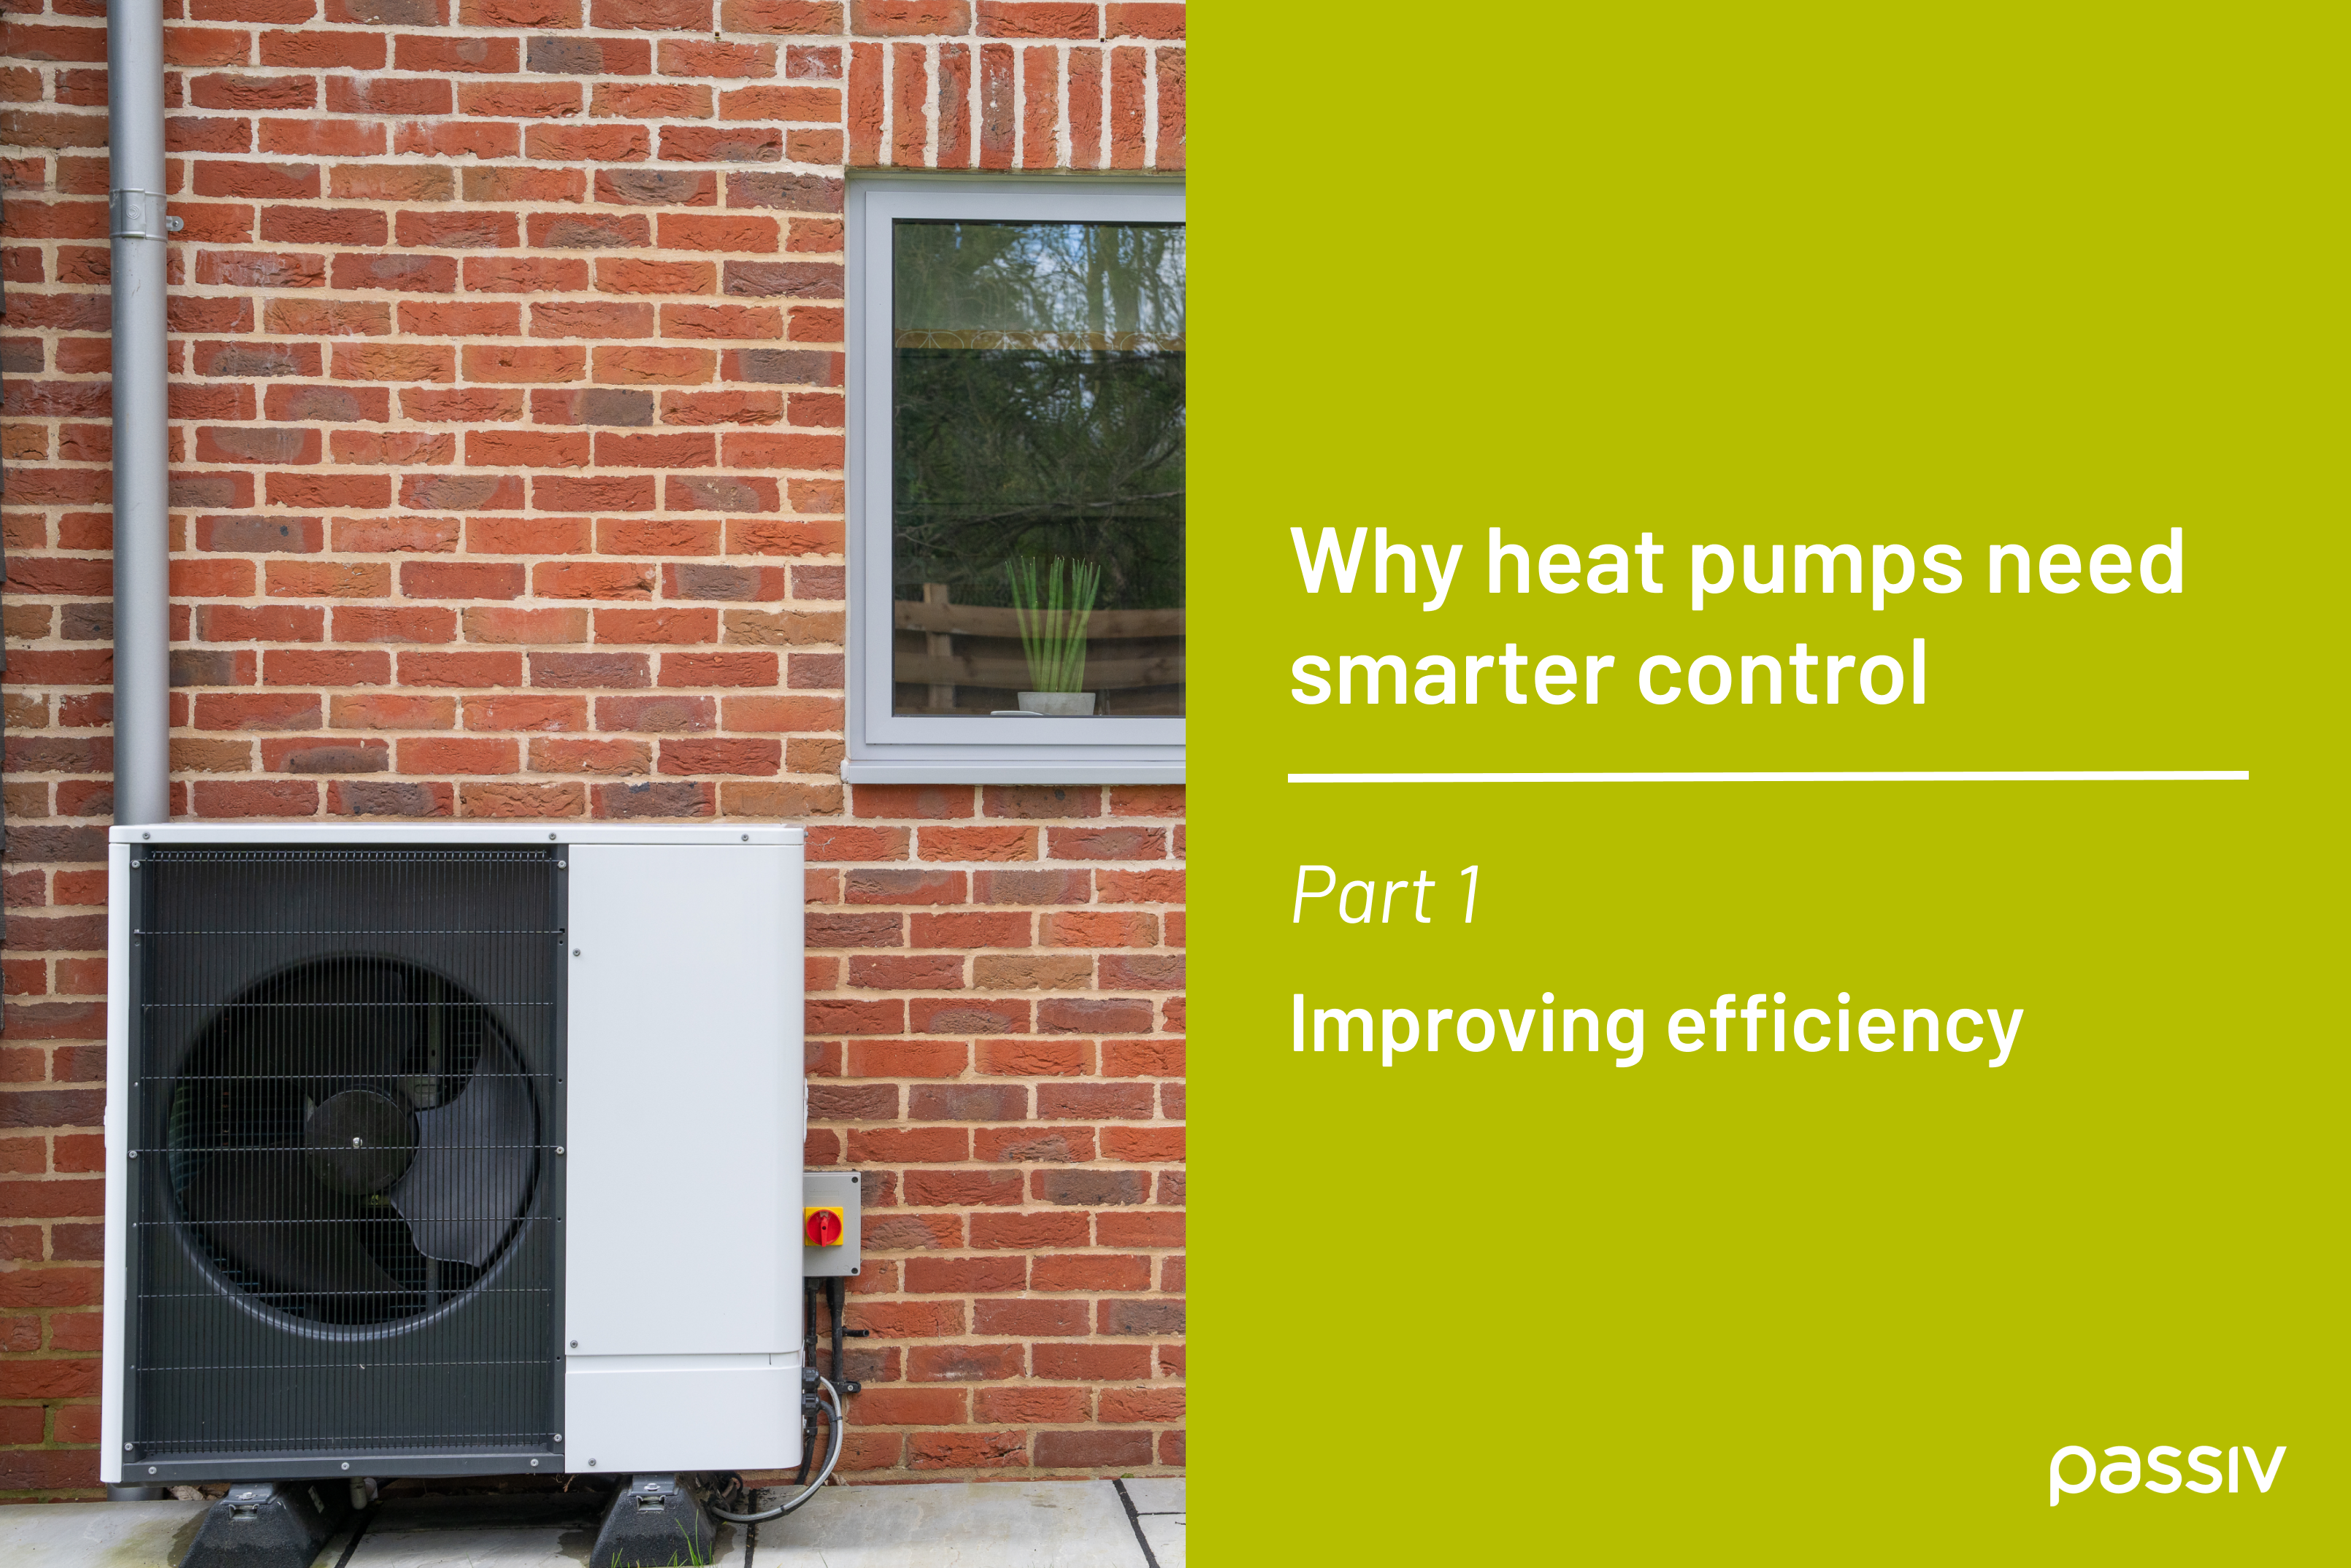 Why heat pumps need smarter control - improving efficiency